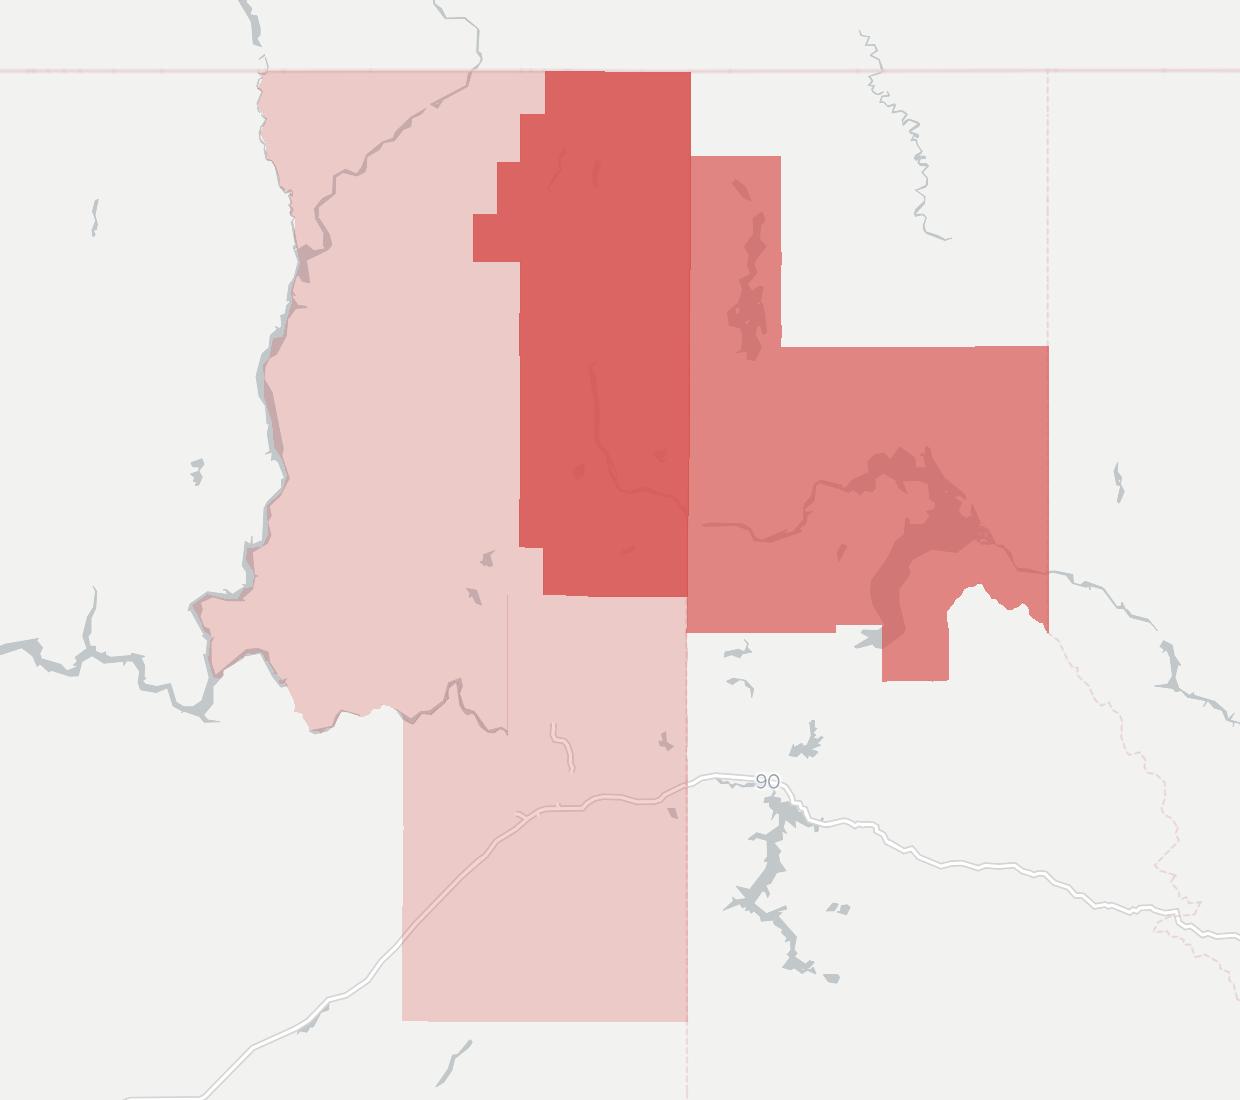 Pend Oreille Valley Networks Availability Map. Click for interactive map.